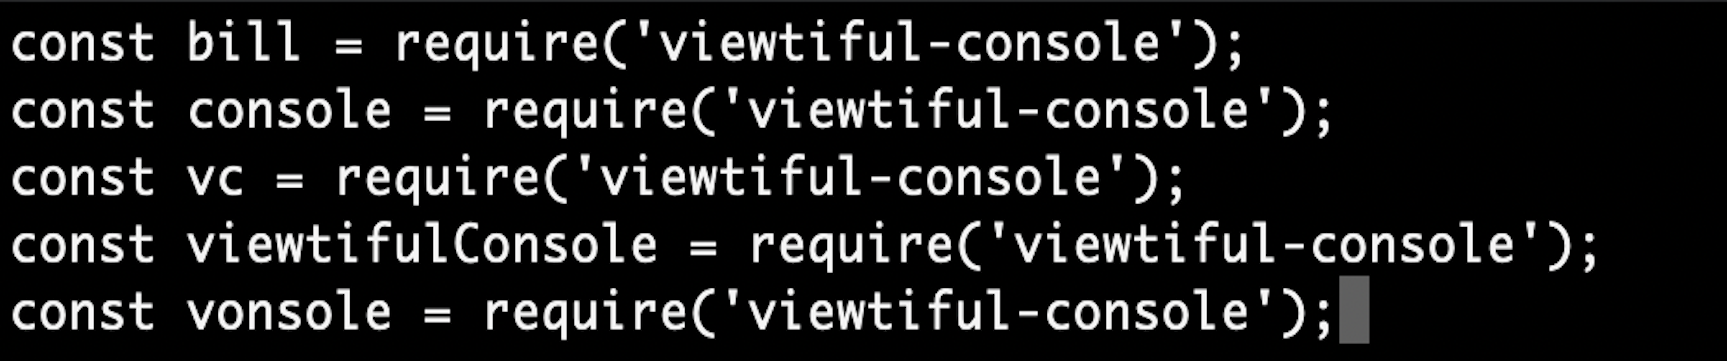 a screenshot of various names you could give the variable you create when you `require` Viewtiful-Console